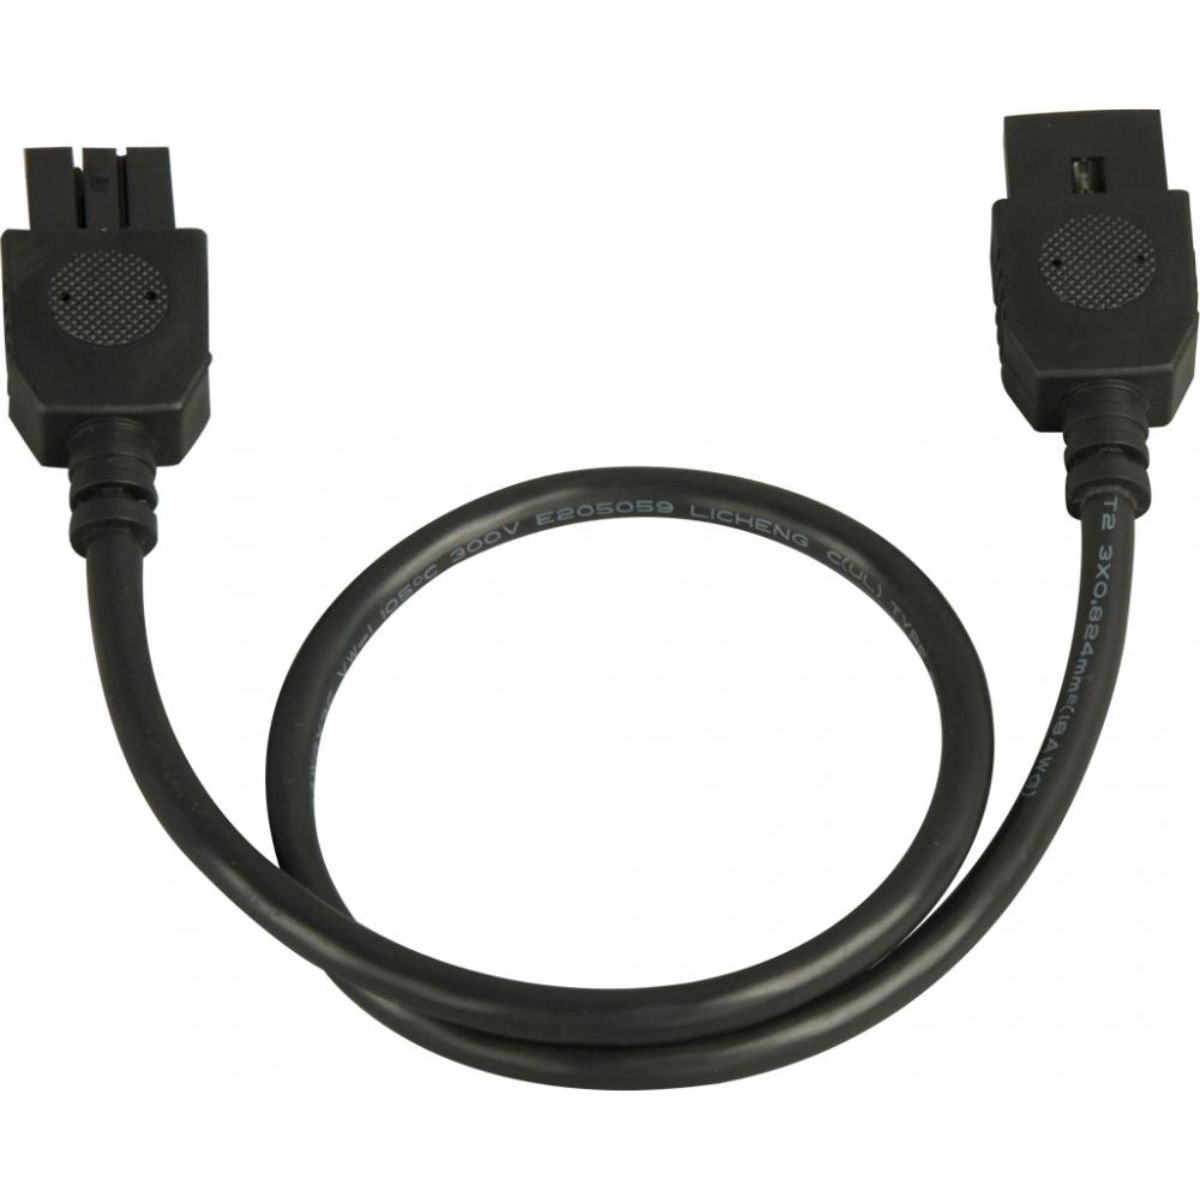 CounterMax 12in. Connecting Cord, Black